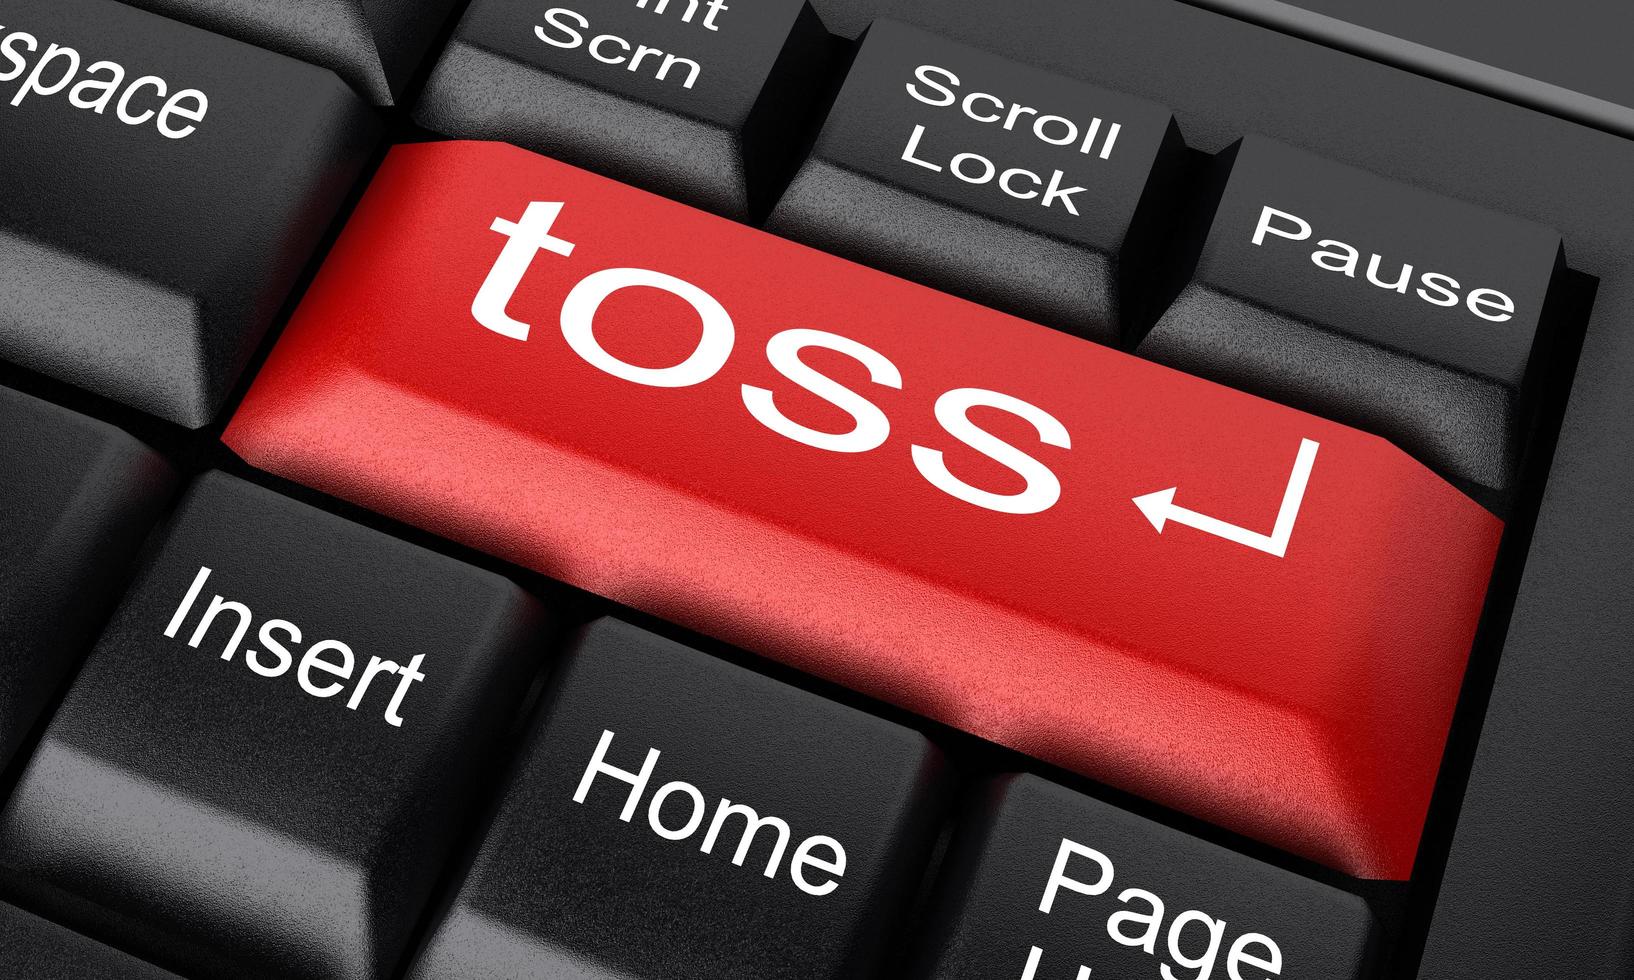 toss word on red keyboard button photo